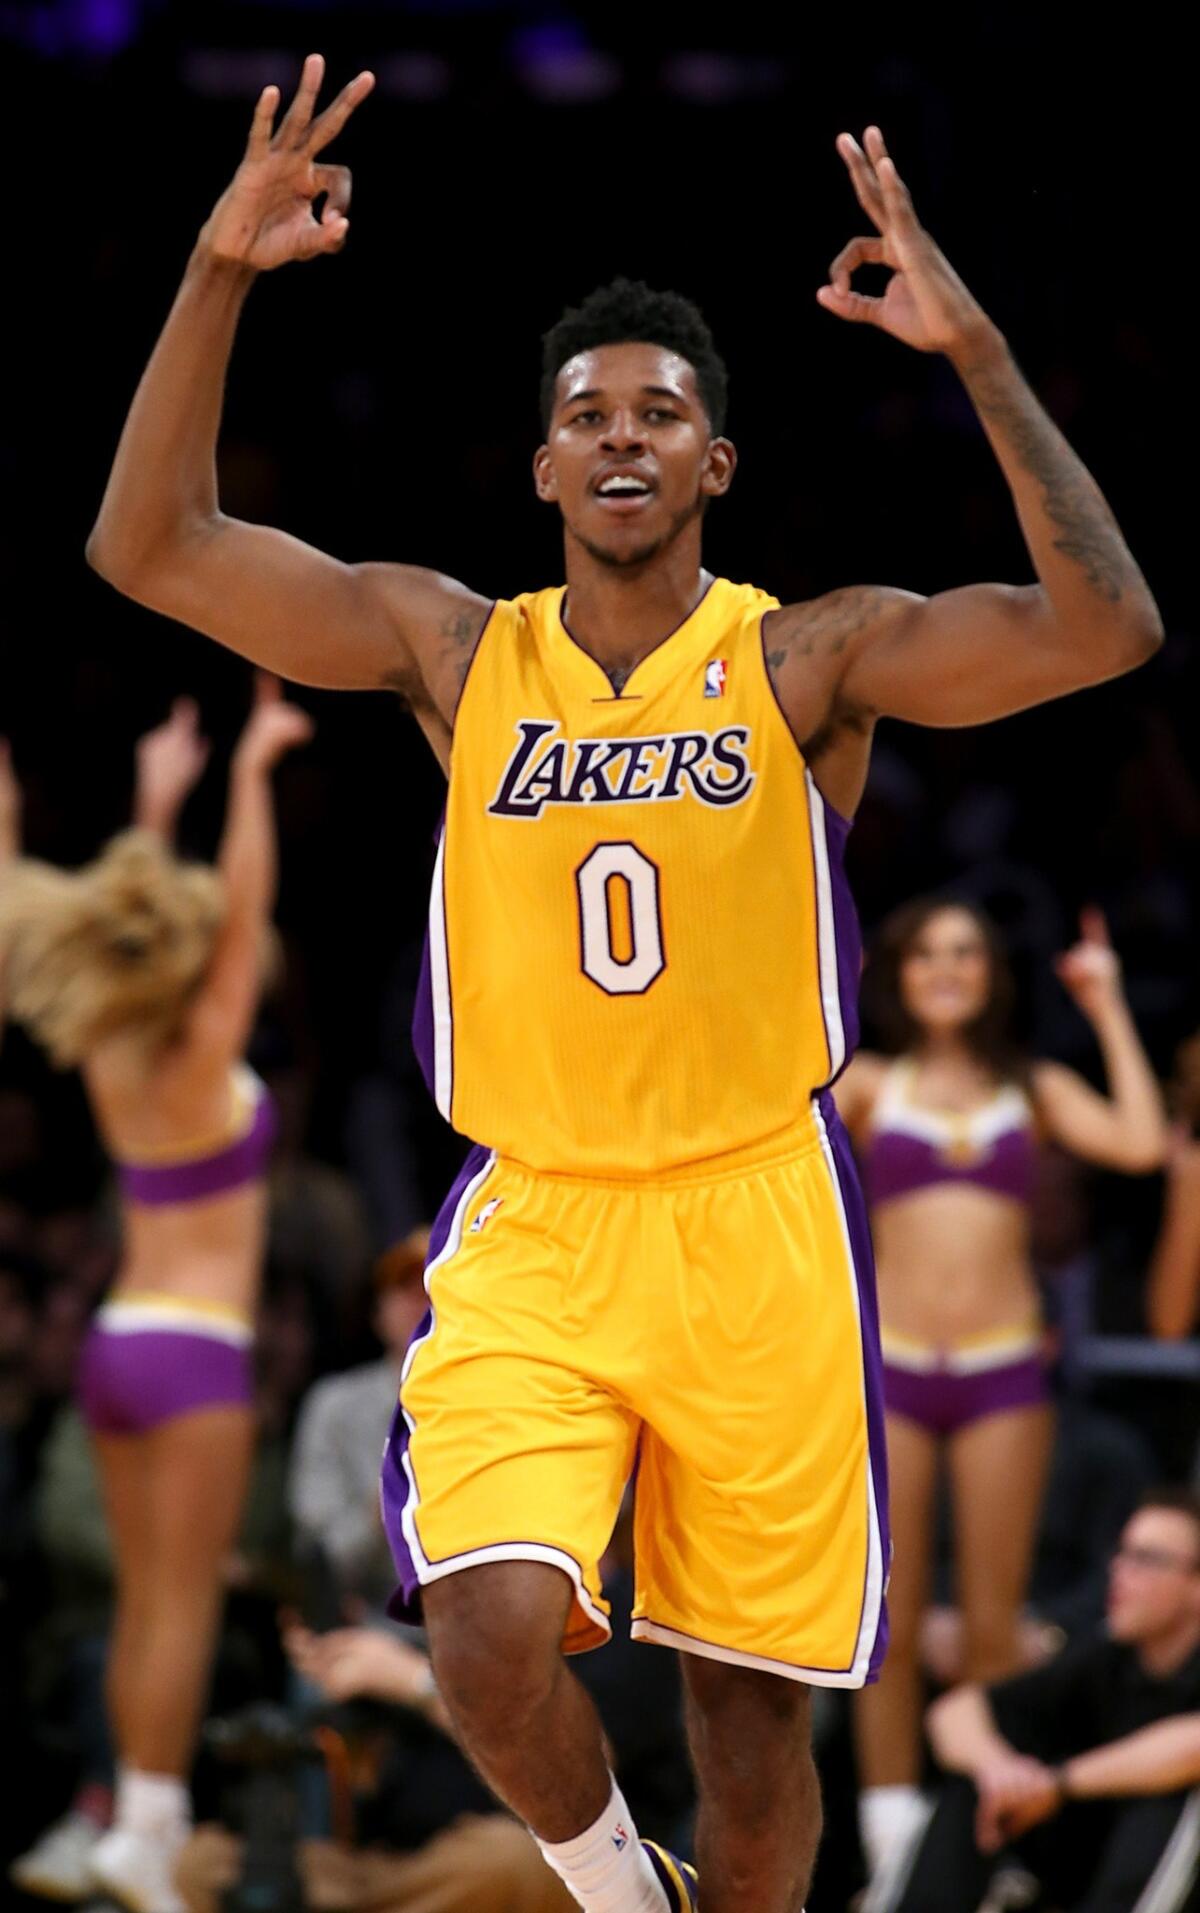 Lakers forward Nick Young celebrates after hitting a three-pointer against the Golden State Warriors in November.